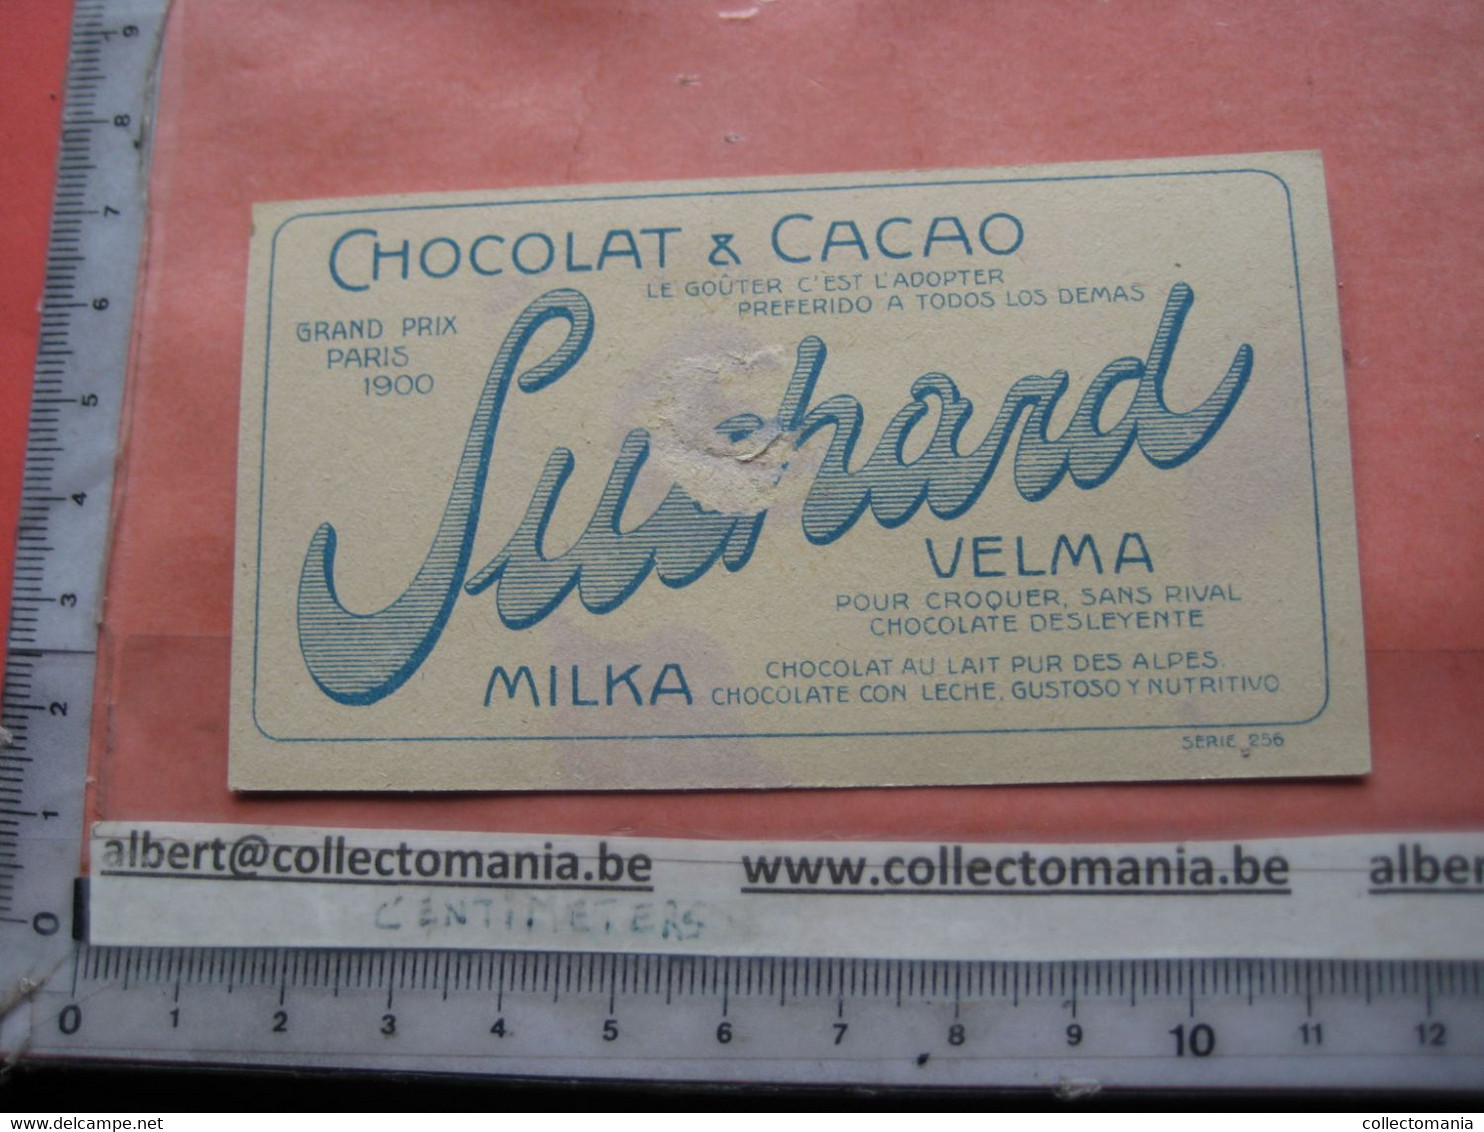 11 Card Chocolade Cacao Suchard nr 256 Flowers - FRONT = VERY GOOD - backside, center glue stain, bad ungluing